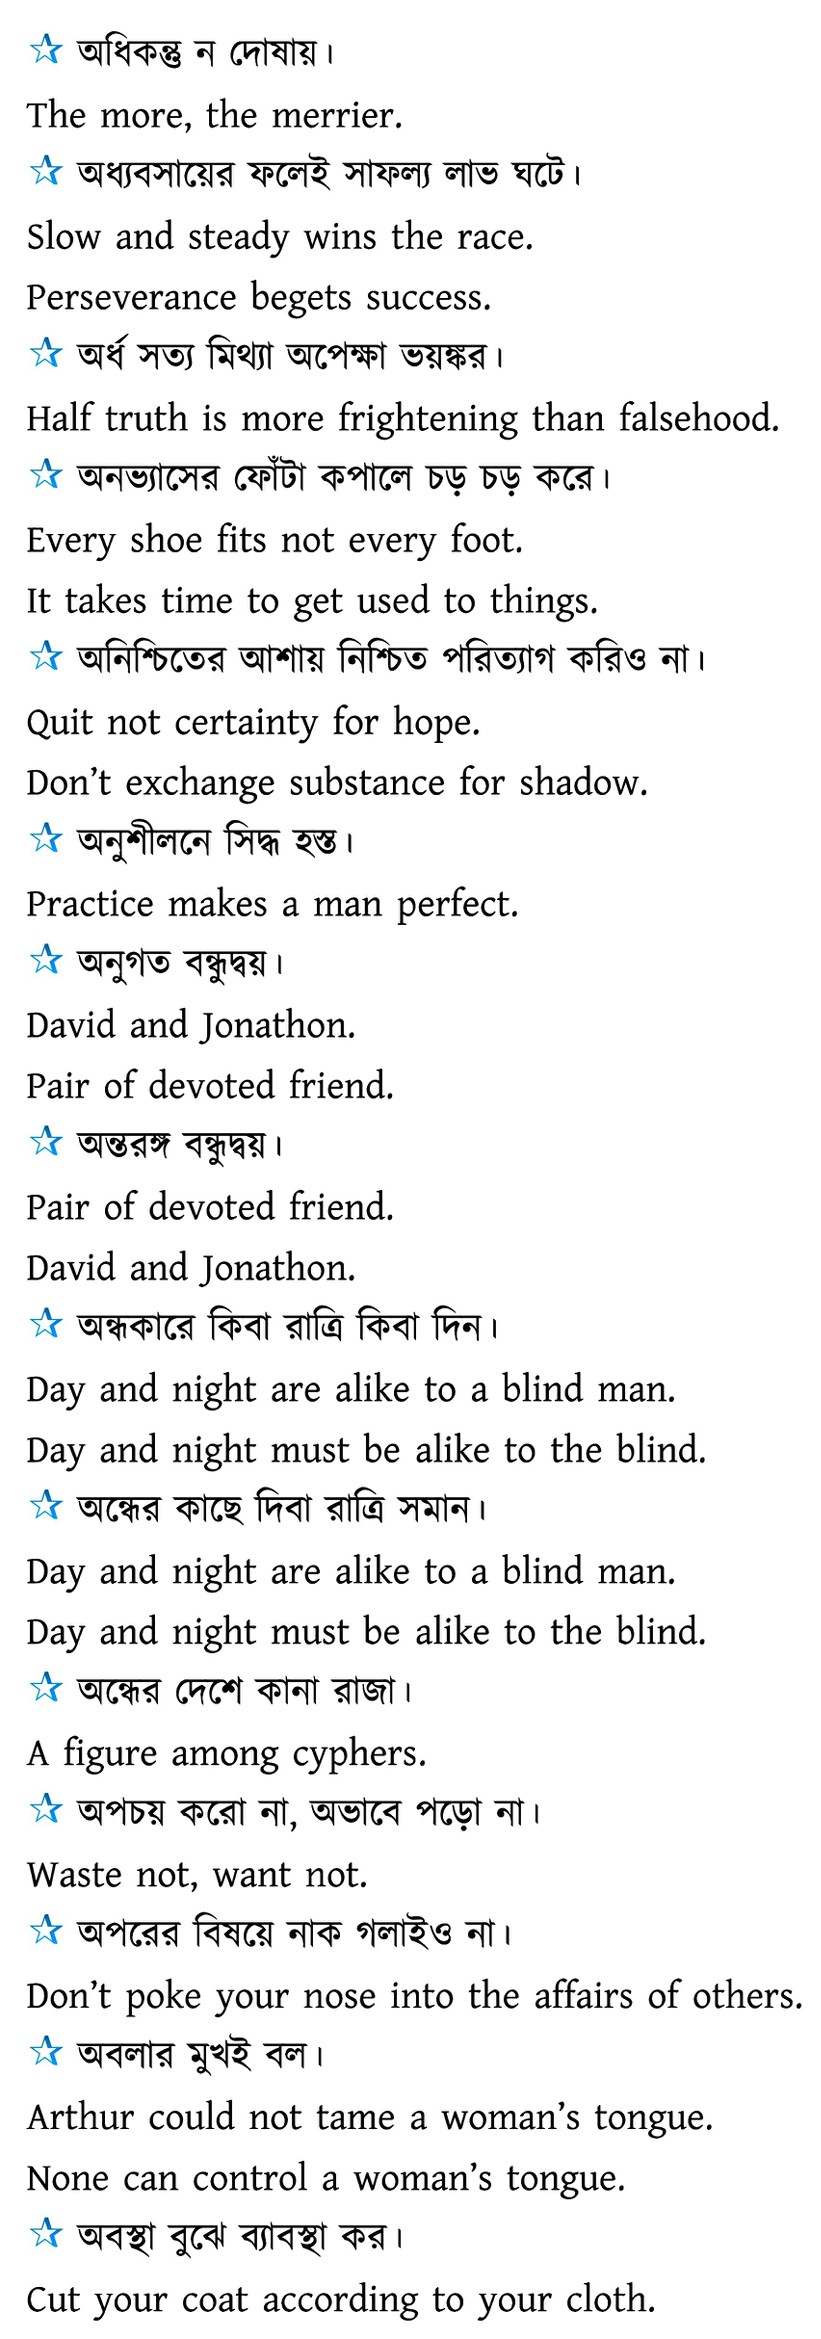 500+ Proverb With Bengali Meaning - WBCS Notebook